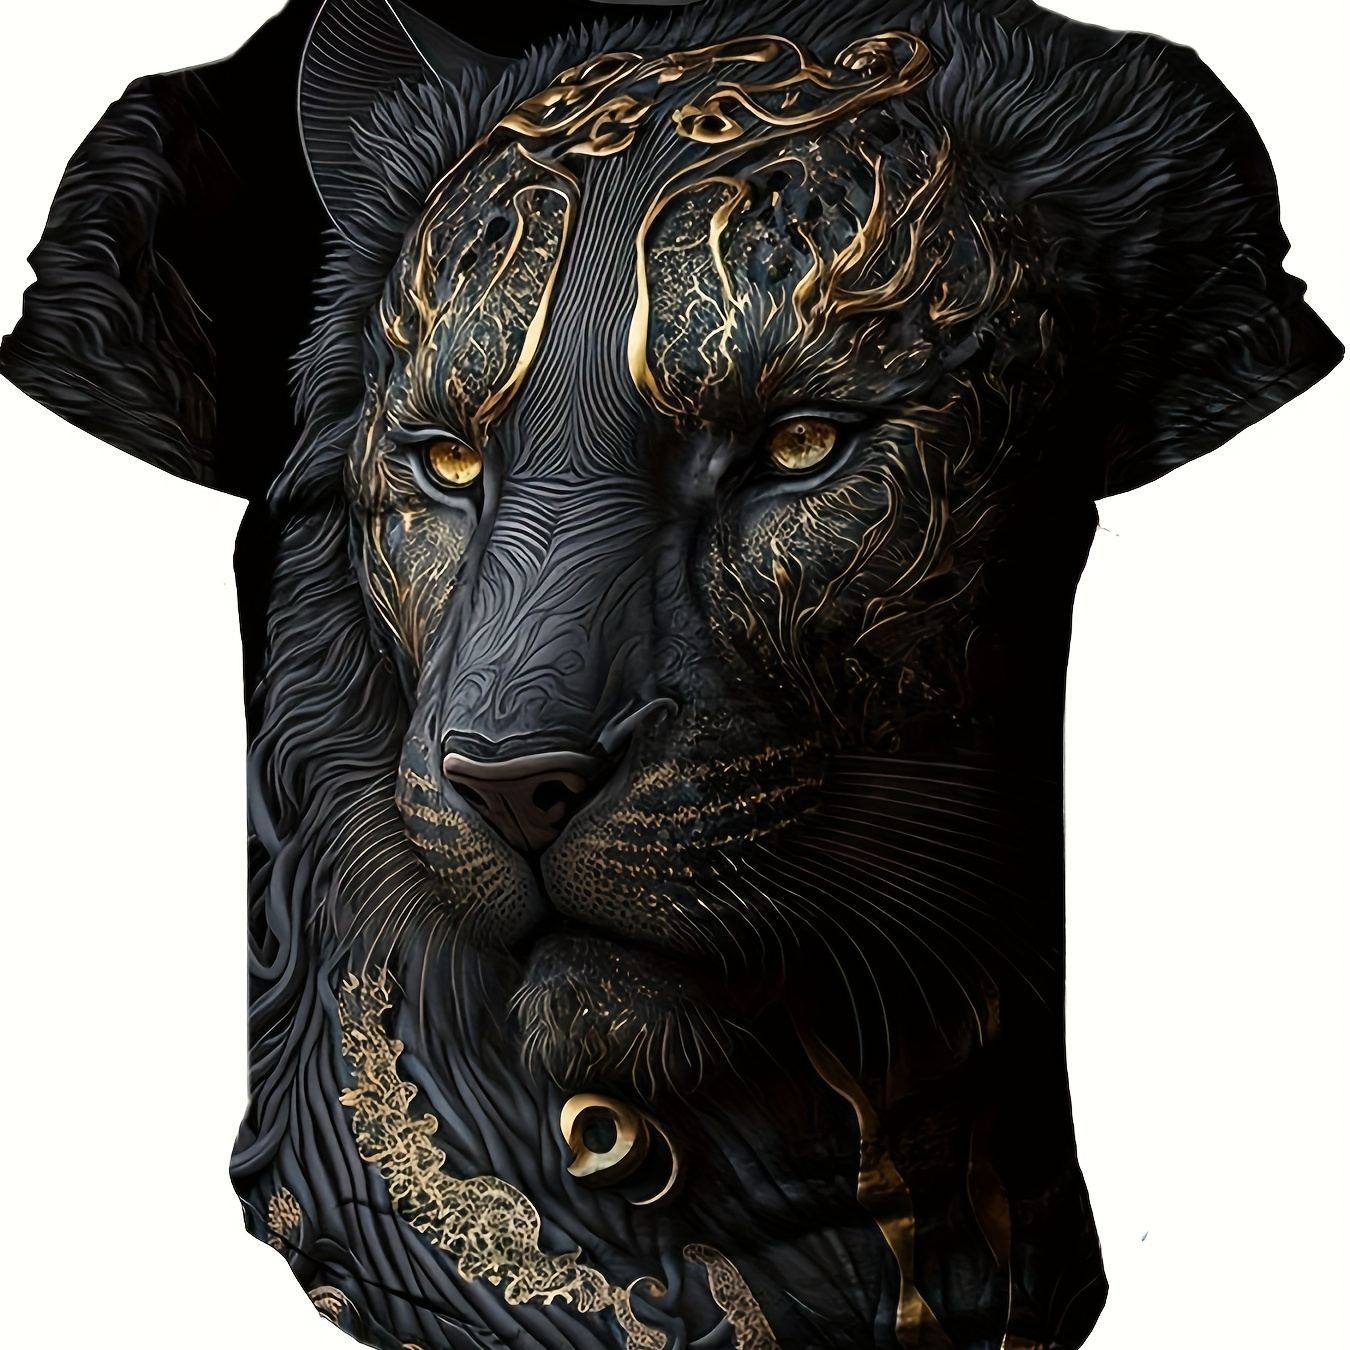 

3d Beautiful Panther Print, Men's Graphic Design Crew Neck Active T-shirt, Casual Comfy Tees Tshirts For Summer, Men's Clothing Tops For Daily Gym Workout Running